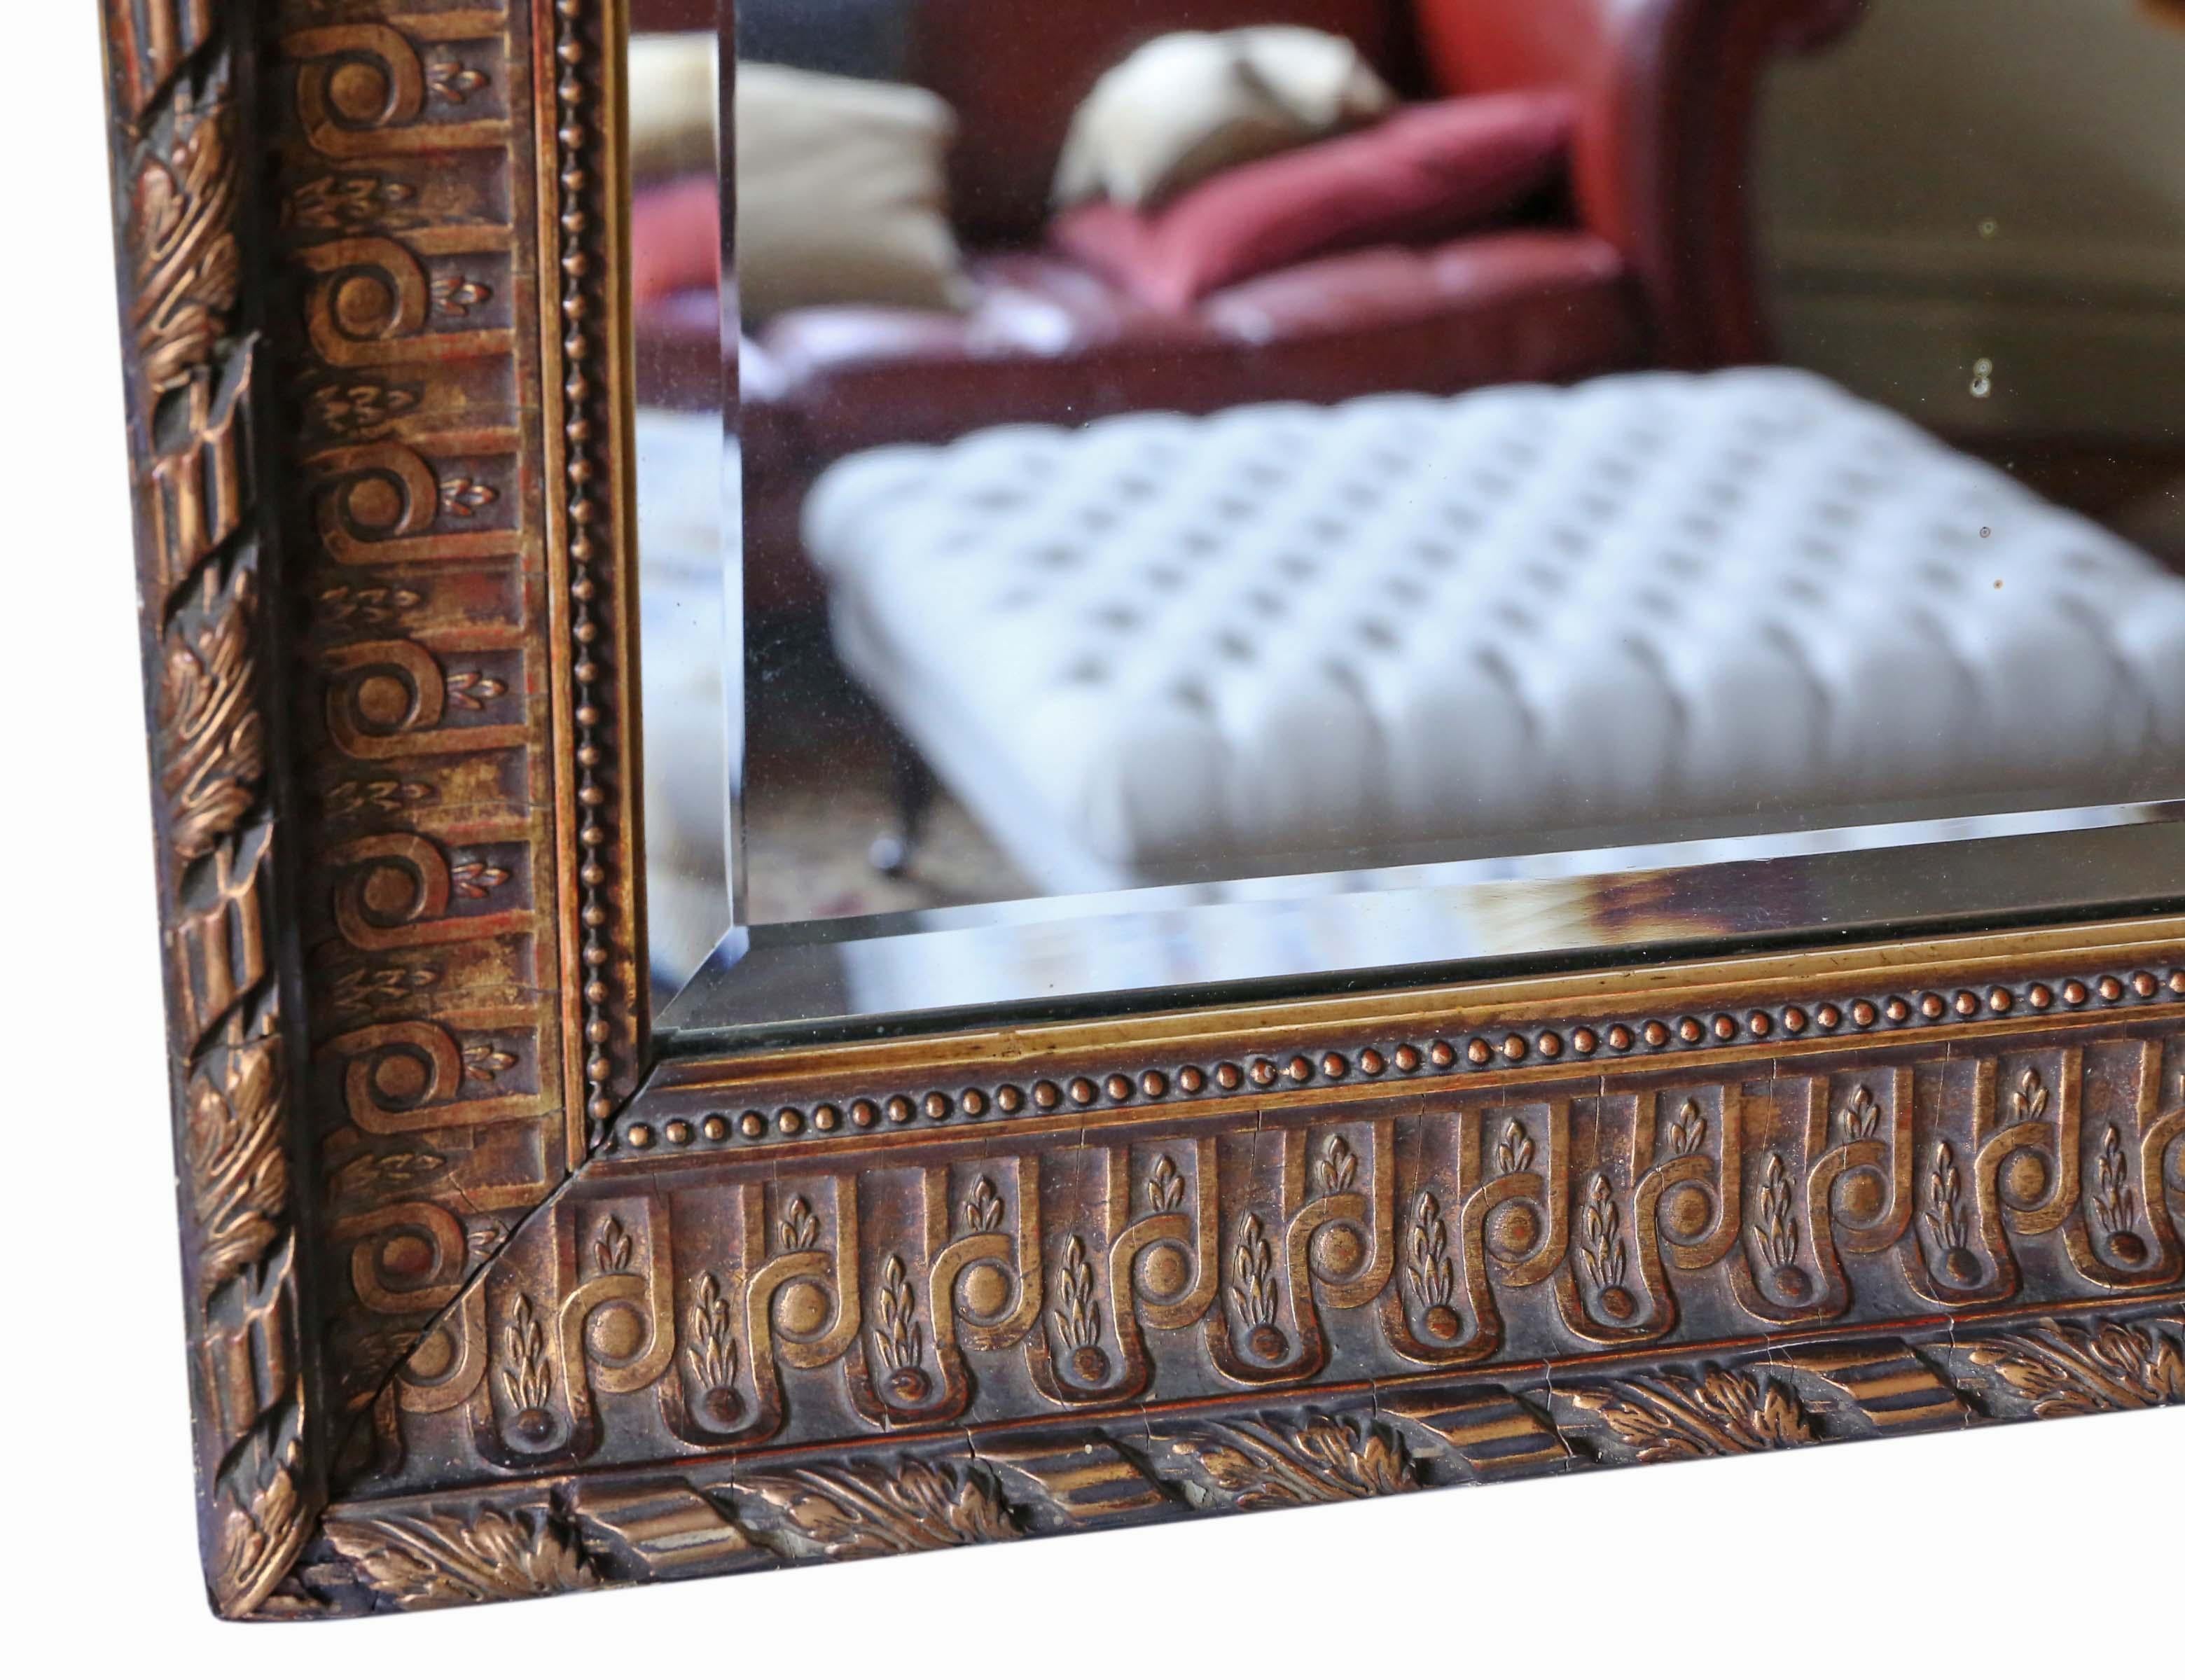 Antique very large late Victorian gilt wall mirror overmantle, circa 1900.
This is a lovely mirror that is full of age, charm and character.
Would look amazing in the right location. Quality period bevel edge glass with light oxidation and hazing